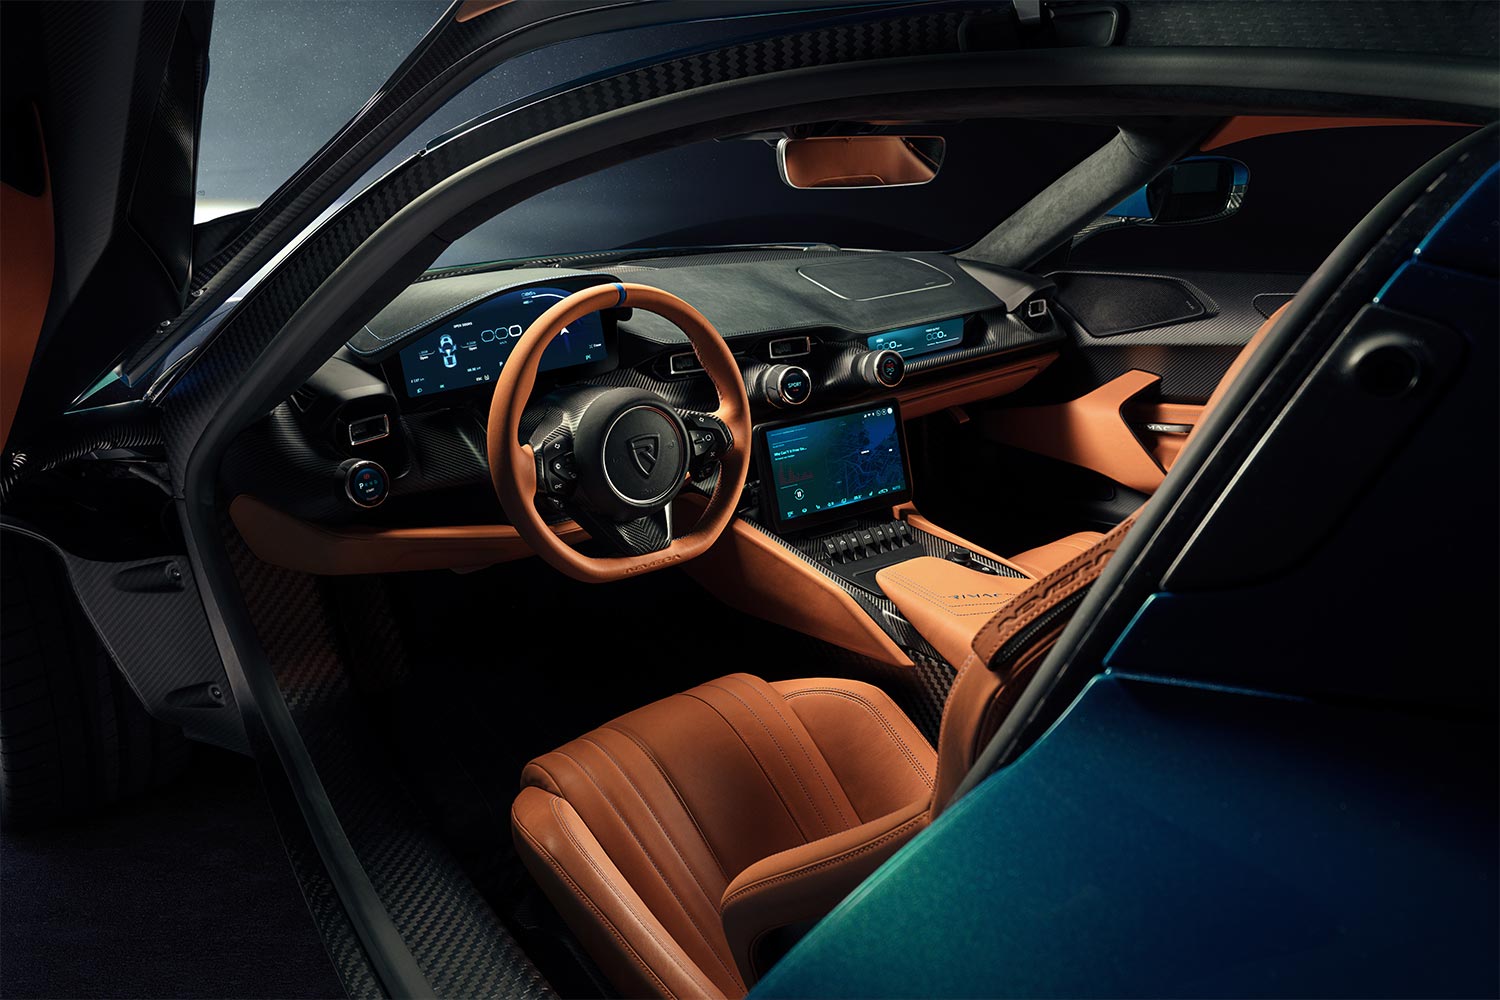 The cockpit and dashboard of the 2023 Rimac Nevera